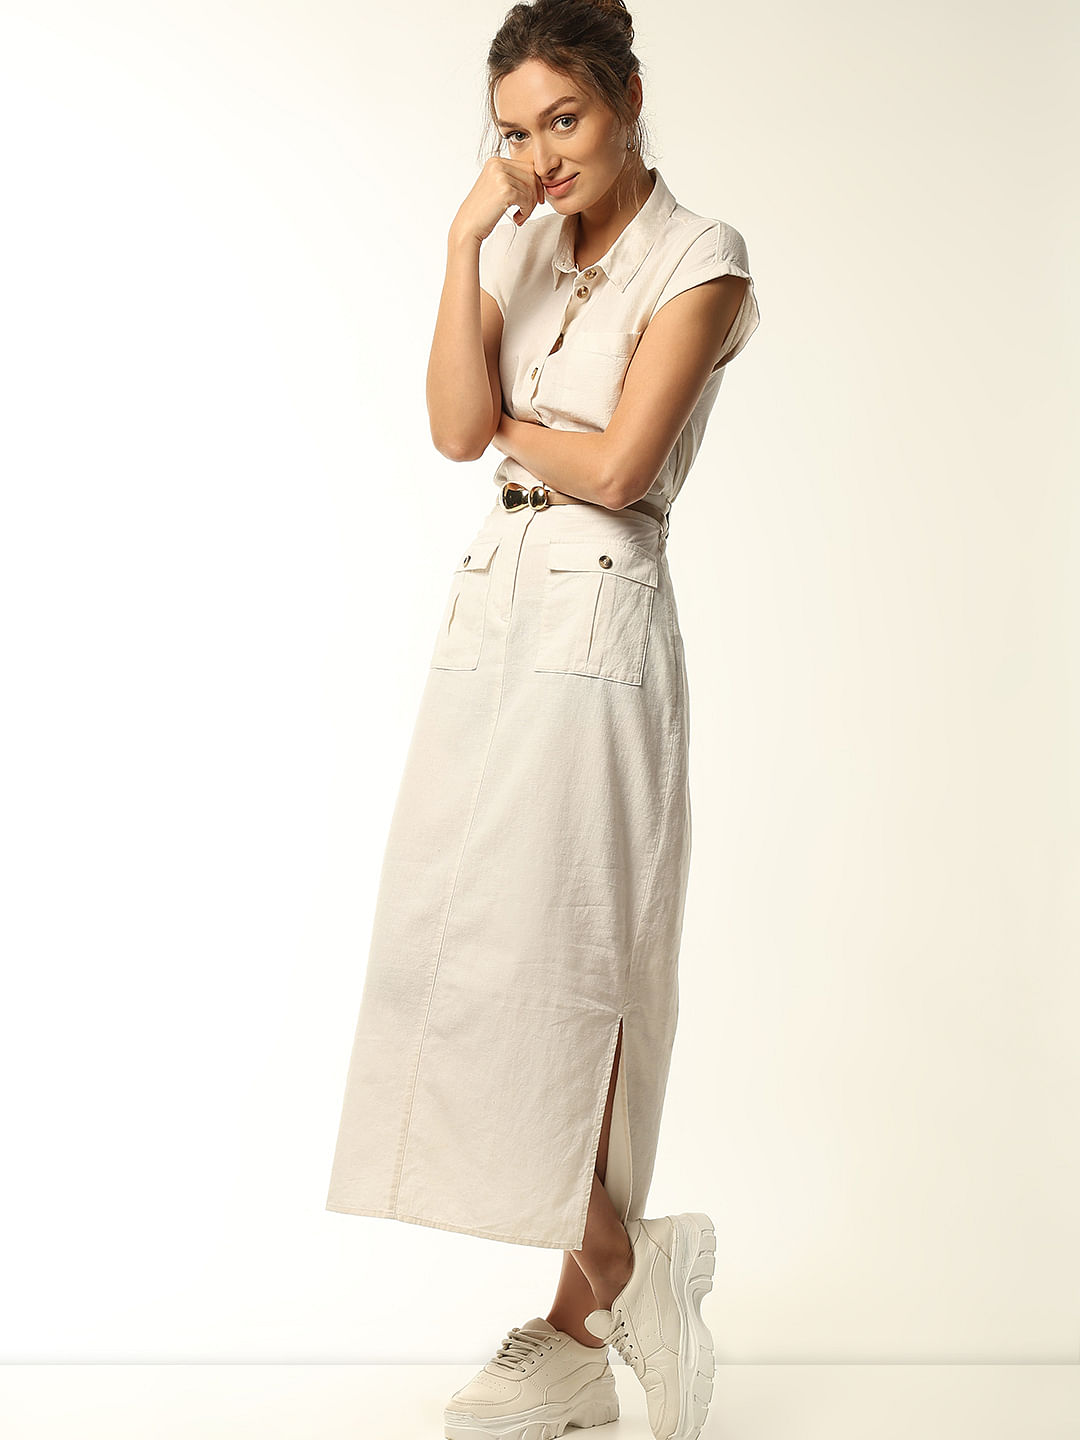 Taffeta Shirt Gown With White Top and Bright Color Skirt – Terijon.com